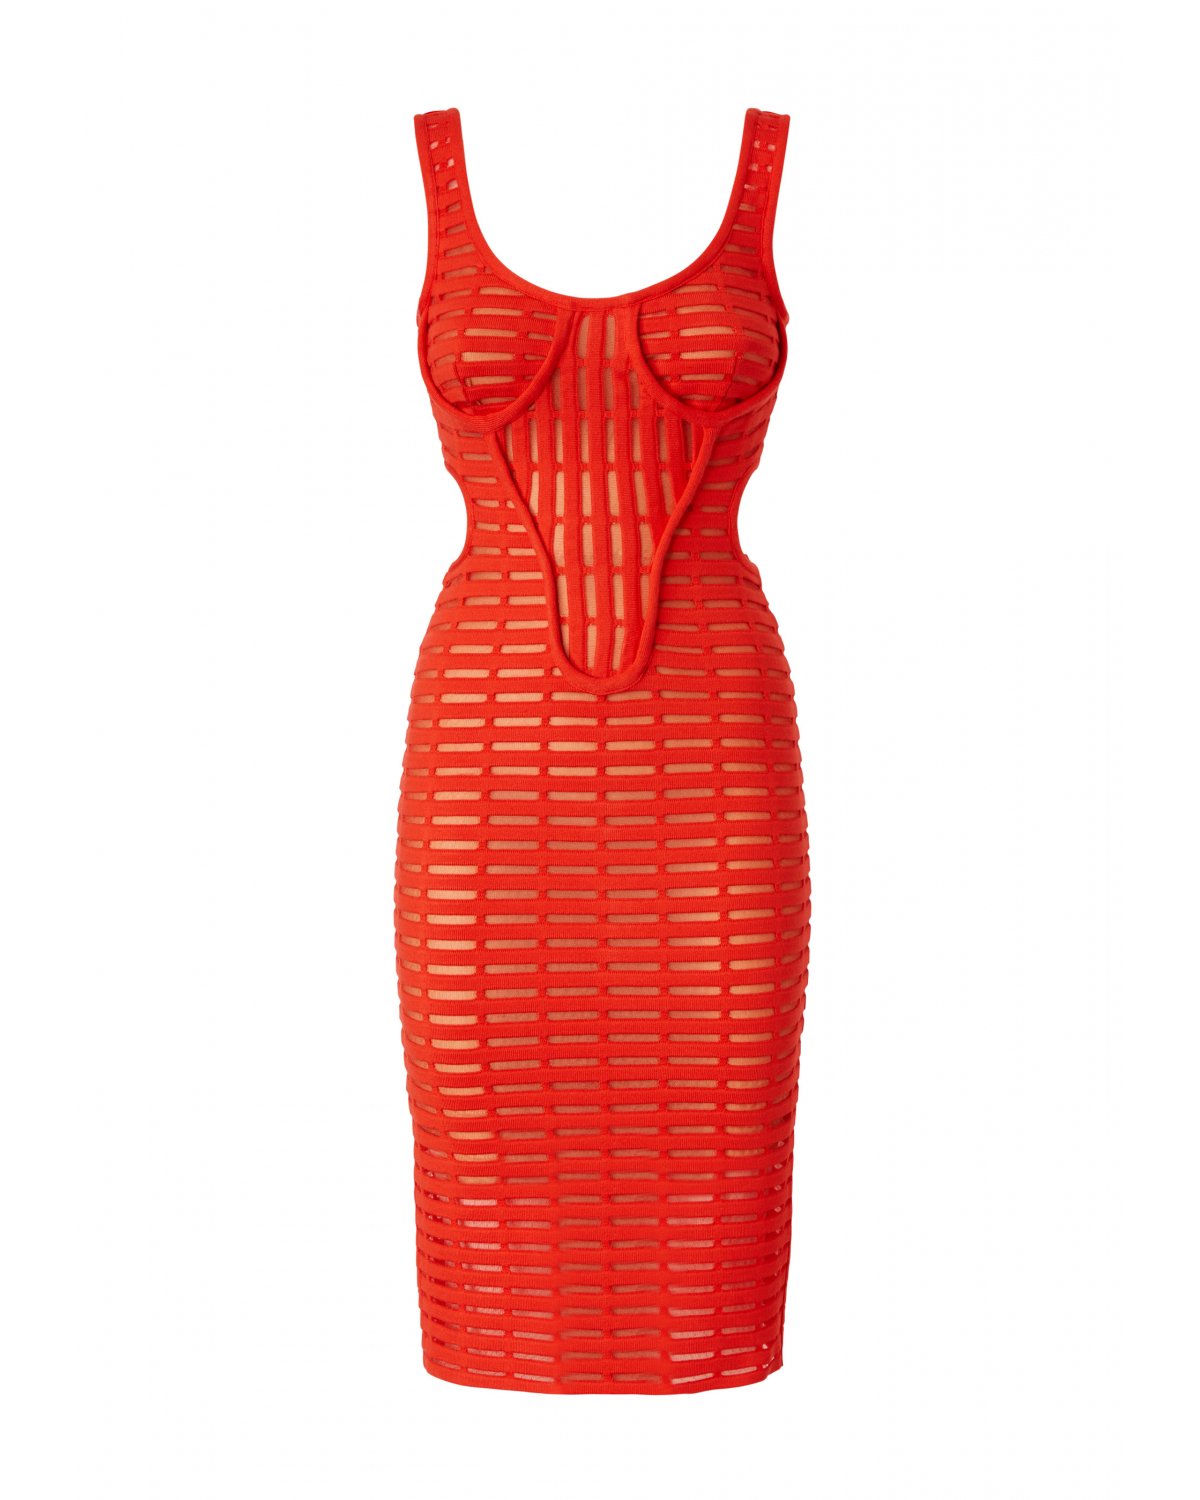 Red iconic dress with cut out | Iconic Capsule Collection, 73_74 | Genny